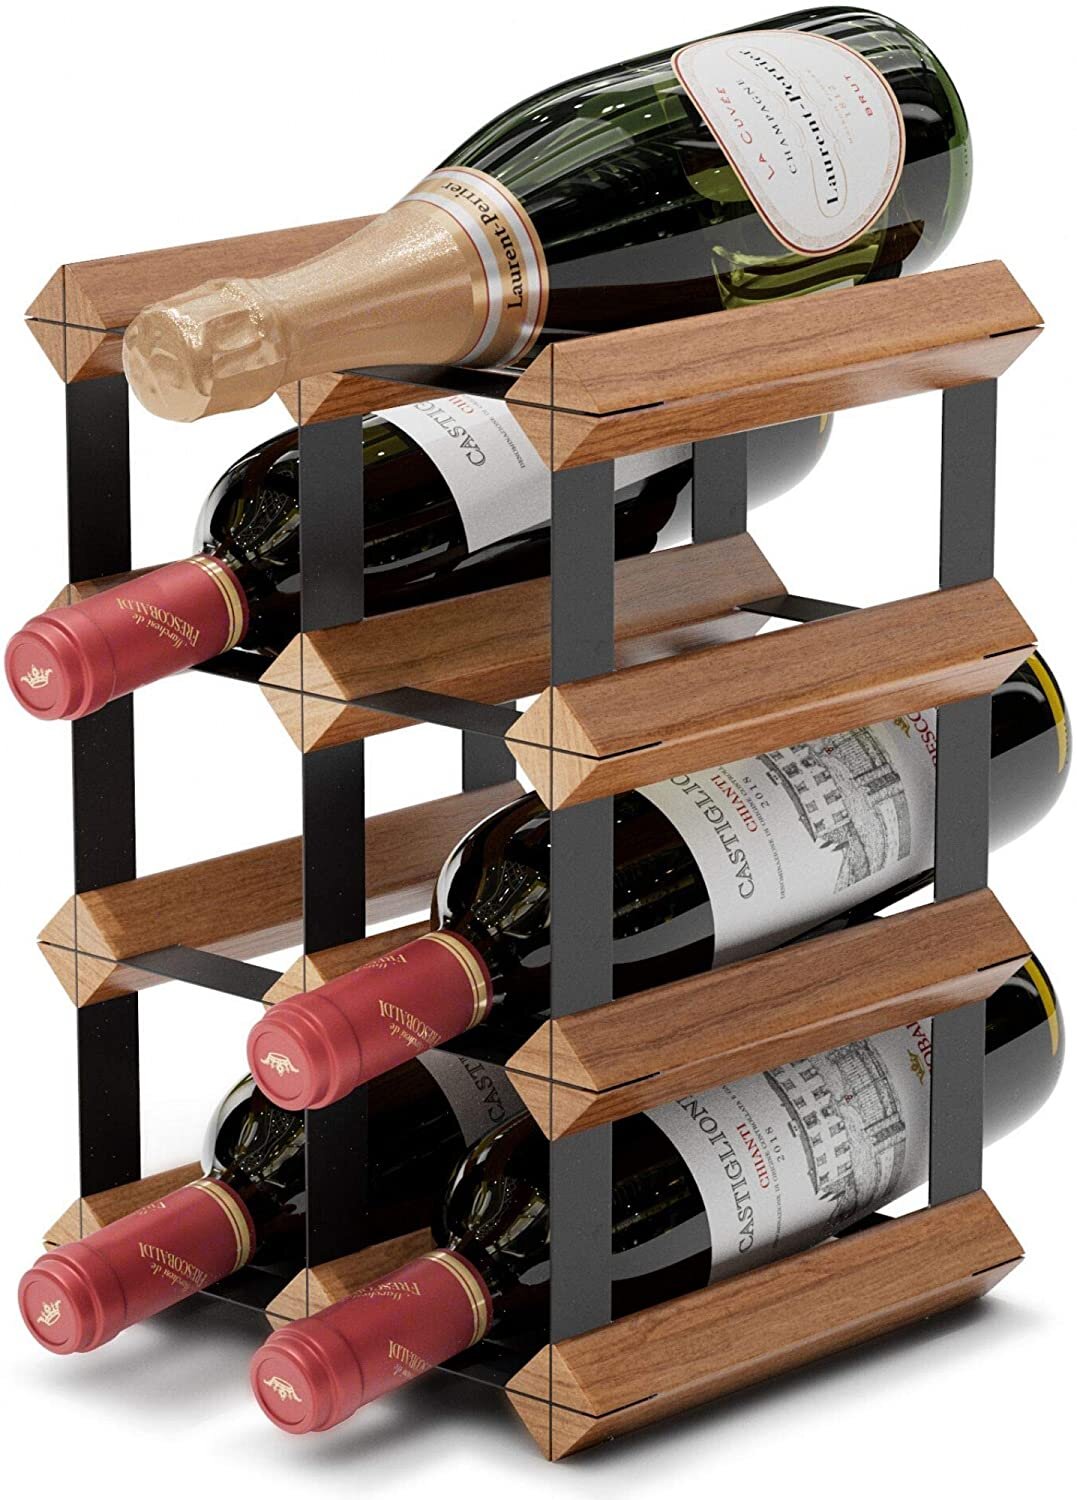 17 Stories Countertop Wine Rack 6 Bottle Wine Holder W 2 Extra Slots No Assembly Required Small Wine Racks Countertop Small Wine Rack Countertop Metal Wine Rack Wine Bottle Rack Tabletop Wine Rack Wayfair